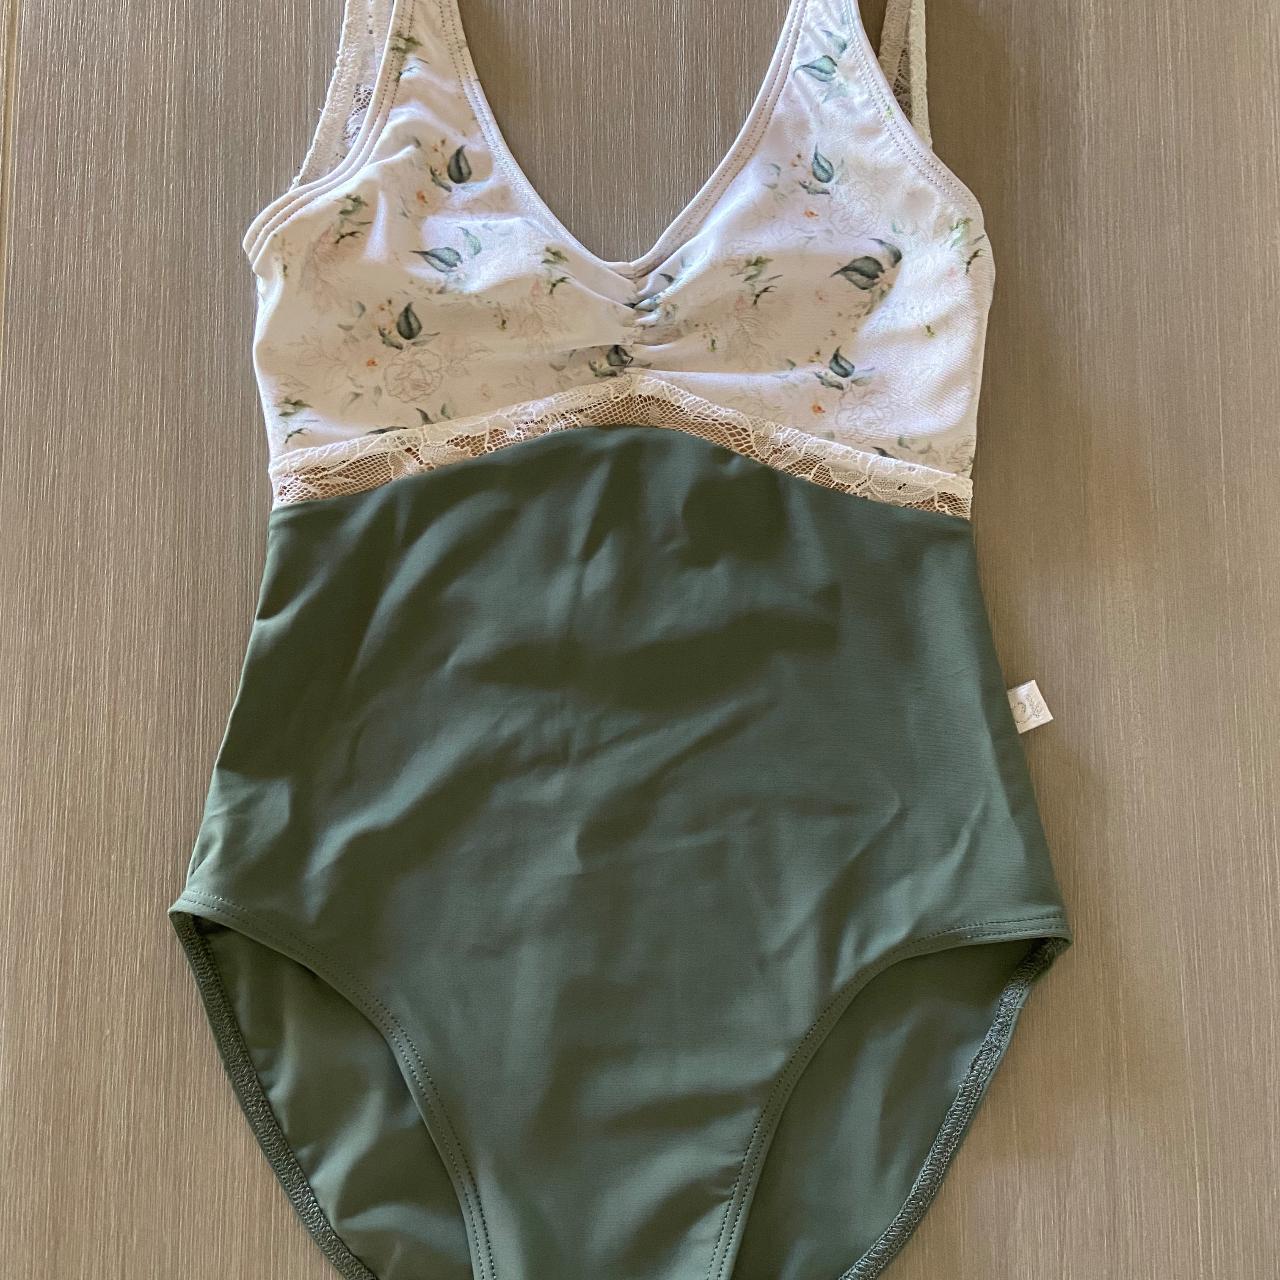 Beautiful sage green floral Class In leotard with a... - Depop